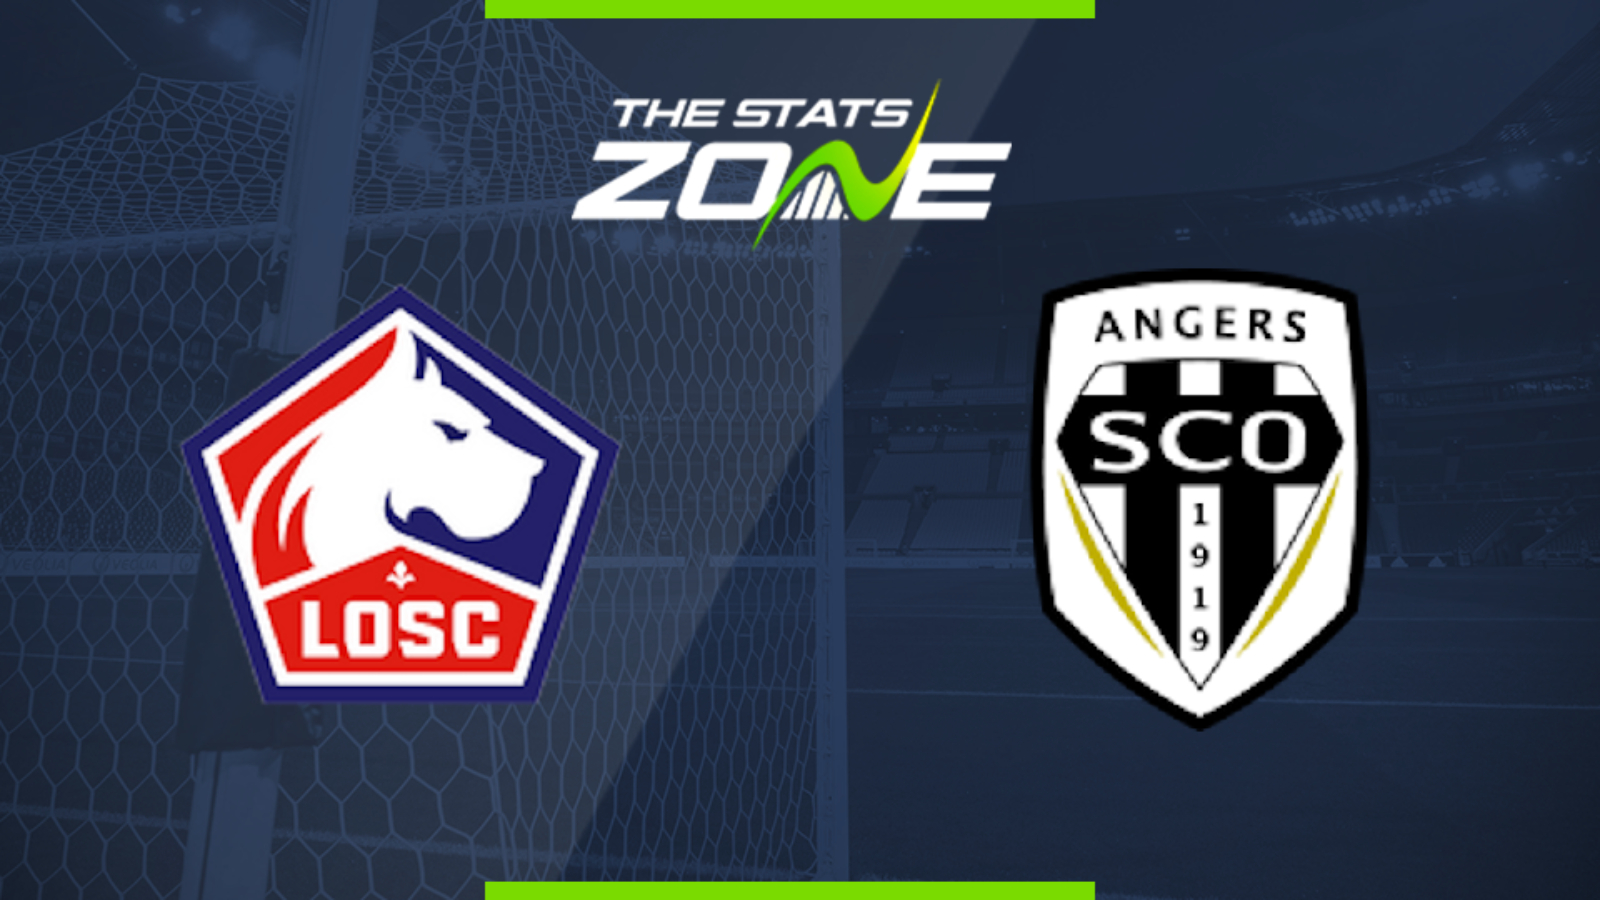 2019 20 Ligue 1 Lille Vs Angers Sco Preview Prediction The Stats Zone